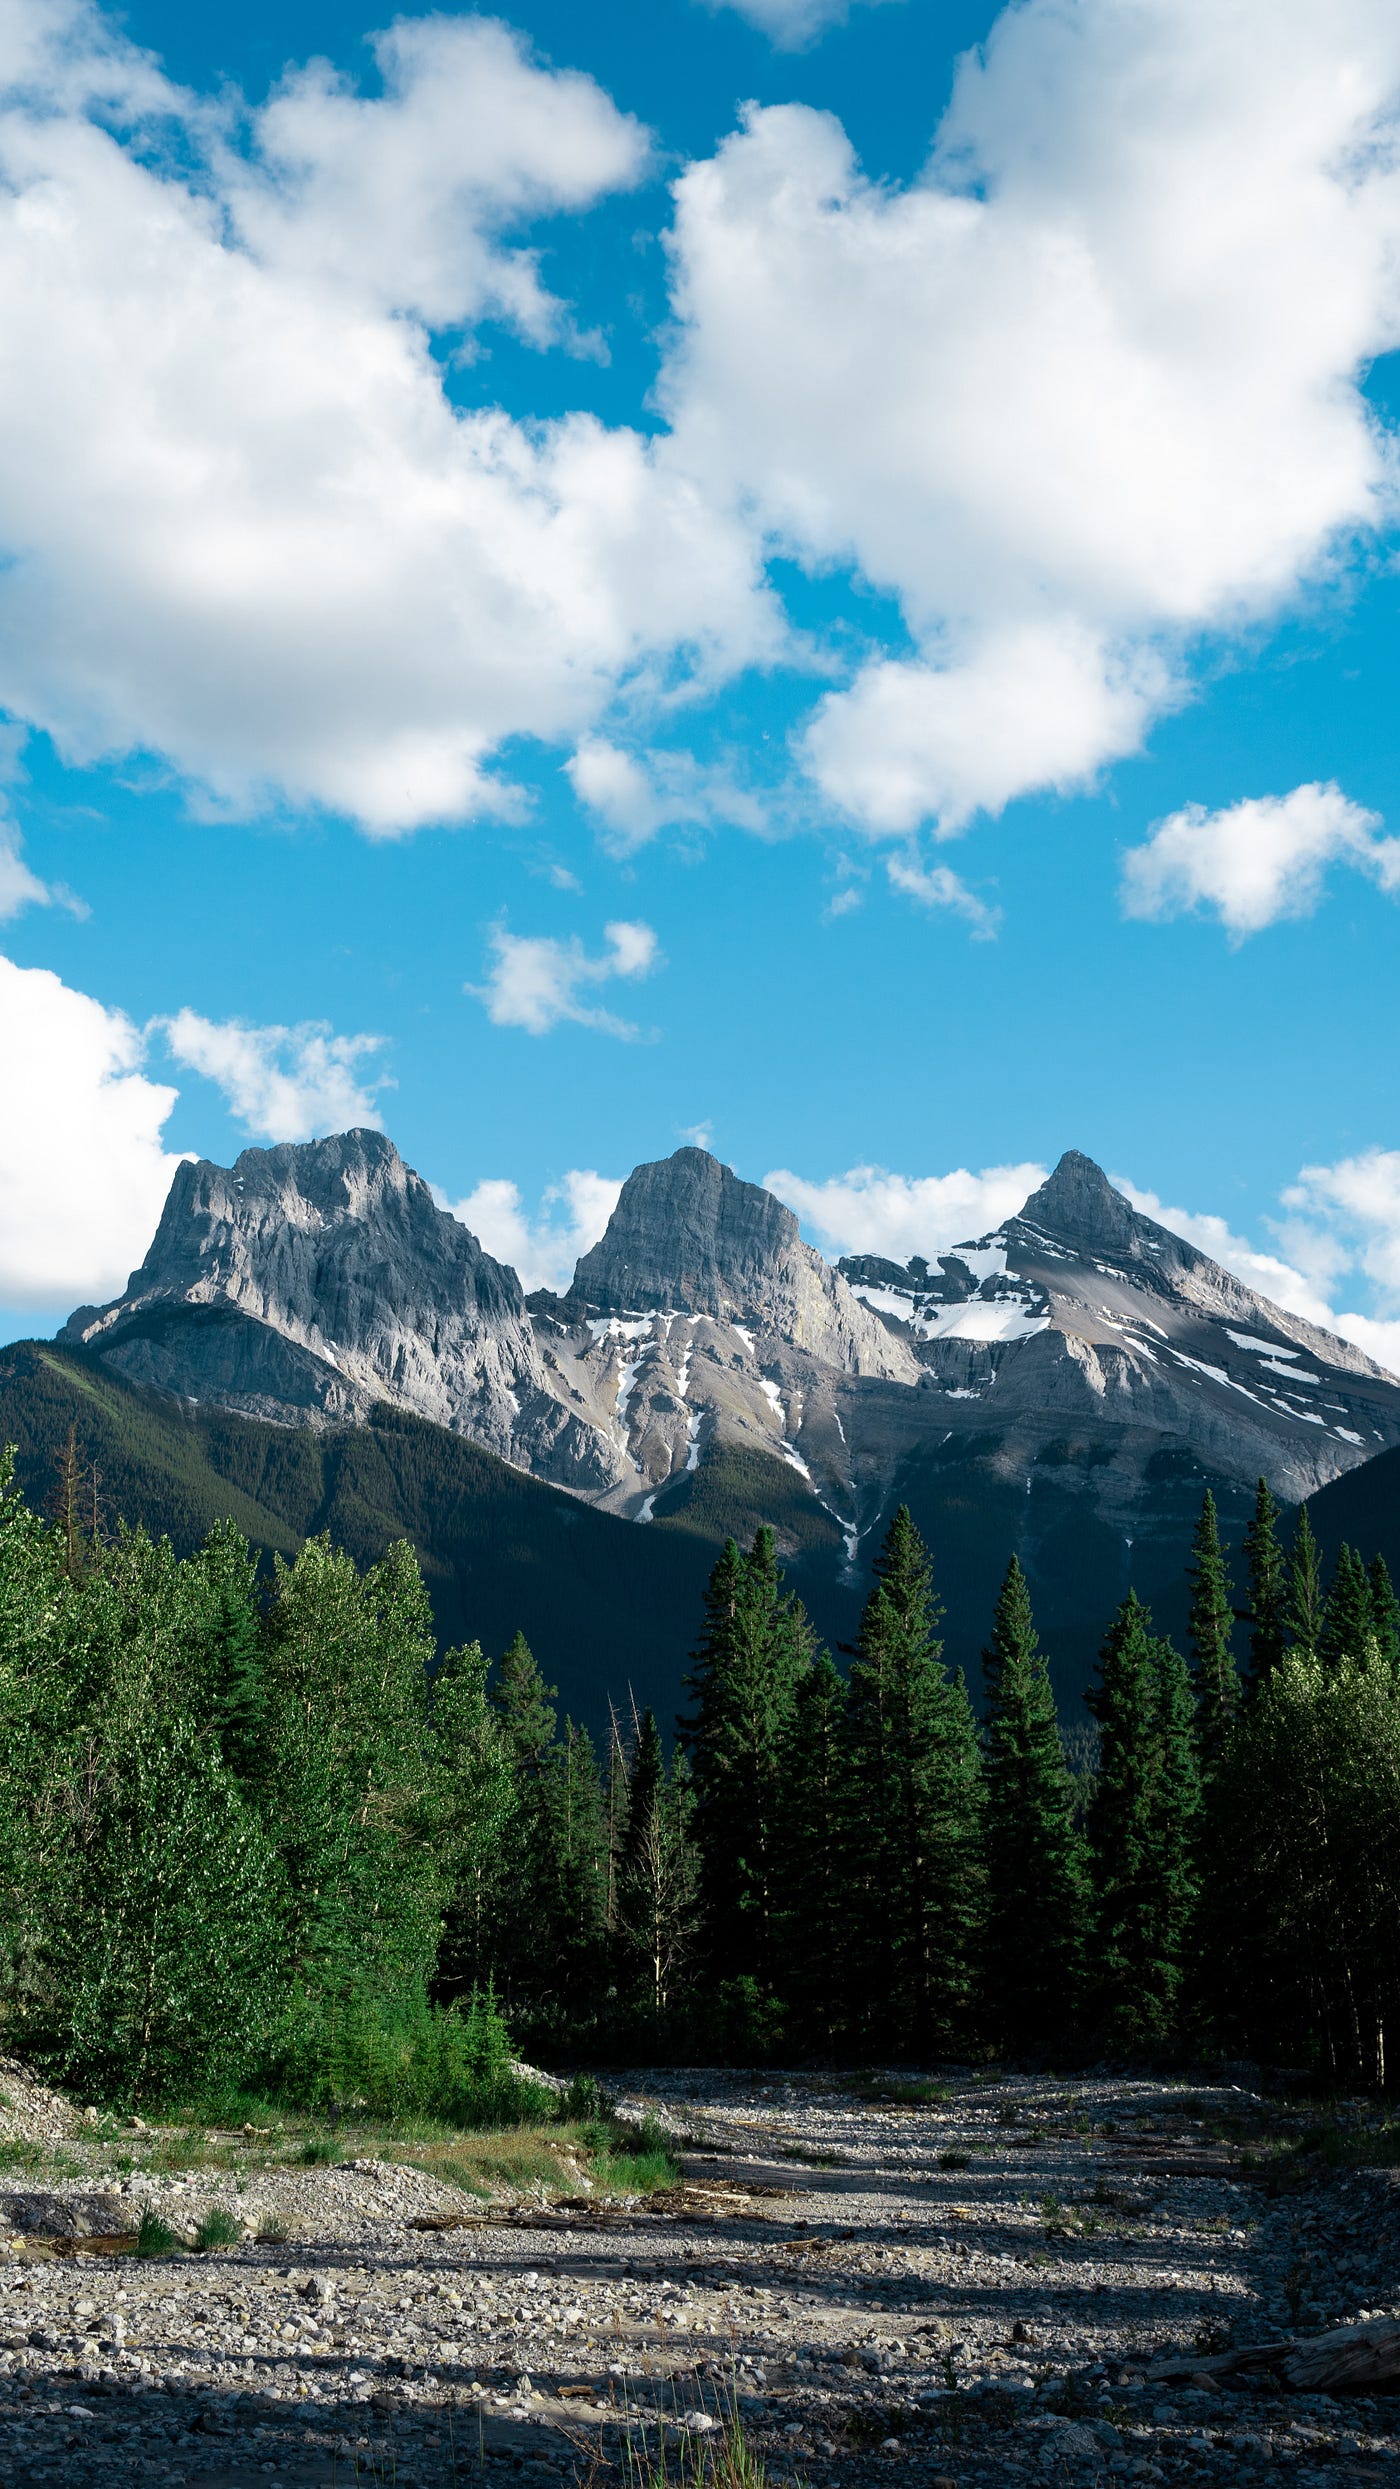 The three sisters mountain peaks in Canada, with blue sky beyond and trees in the foreground